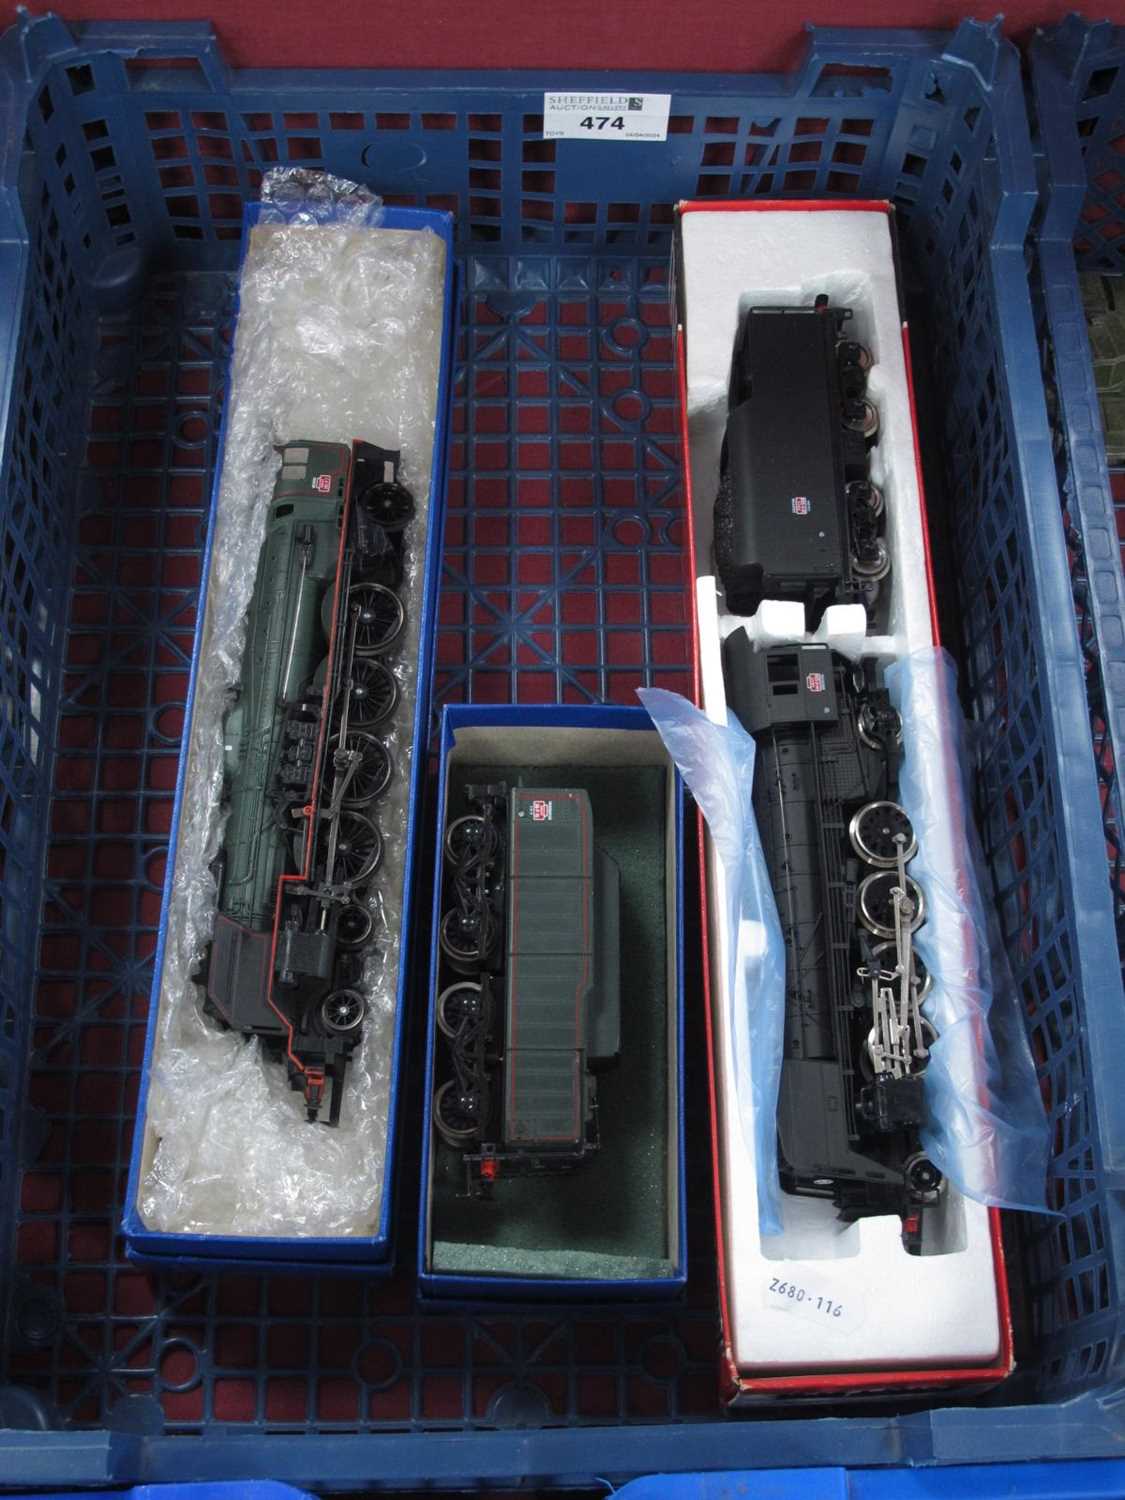 Two Jouef "HO" Gauge Boxed Steam Locomotives, with eight wheel bogie tenders, a Ref No. 8272 Class